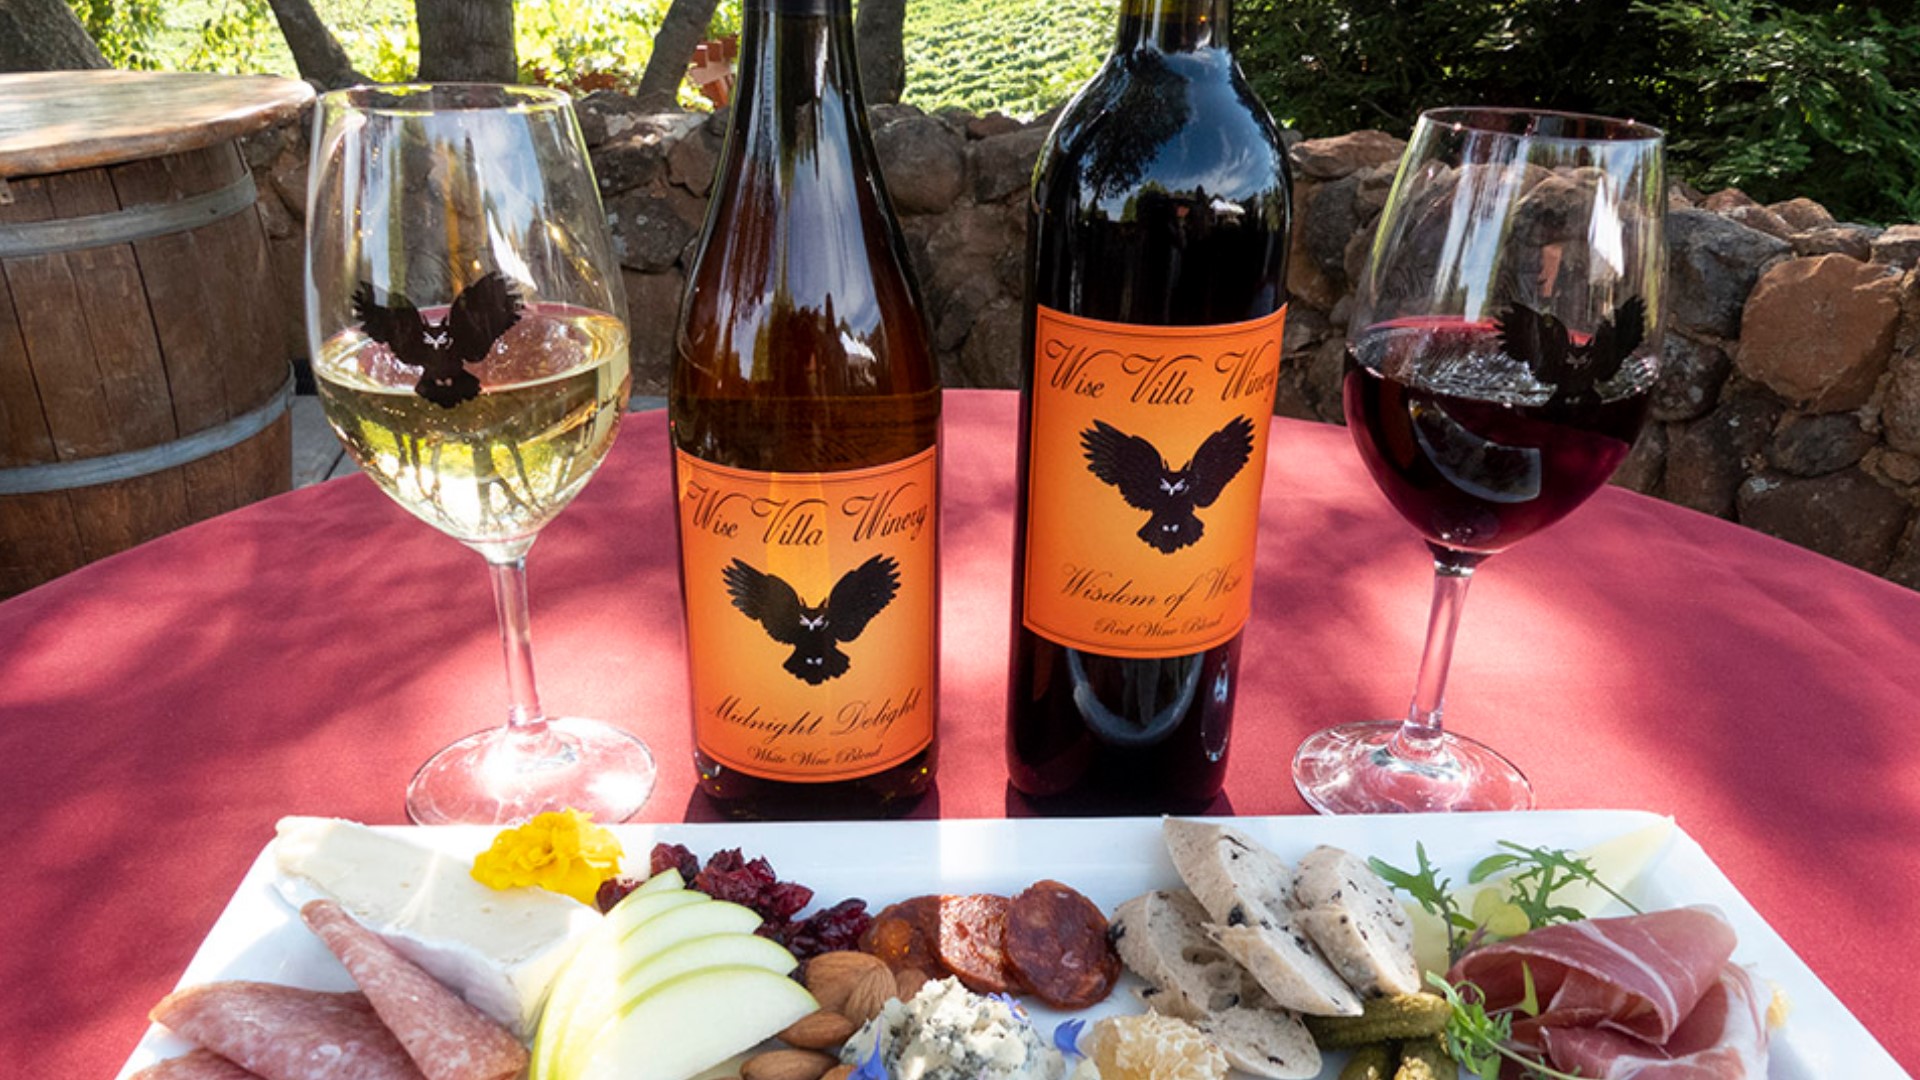 State guidelines now allow Placer County to reopen dine-in restaurants, but wineries are still barred. Thankfully, Wise Villa Winery has a Tuscon-inspired bistro.